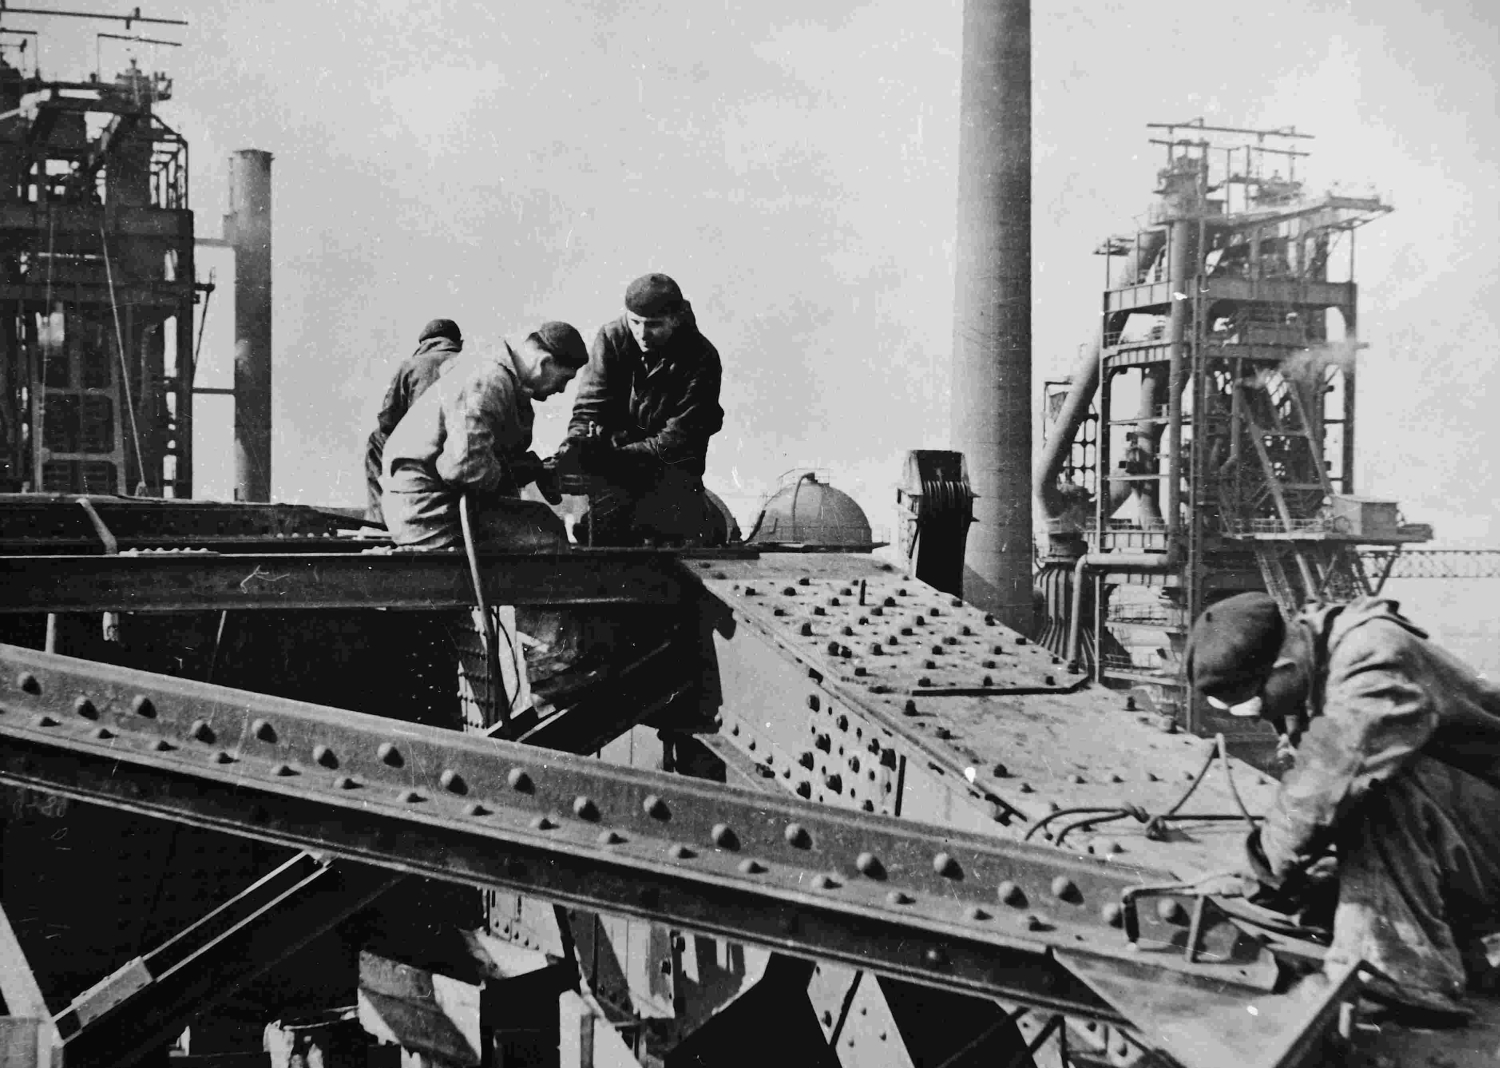 The Ostrava mill turns 70 years old